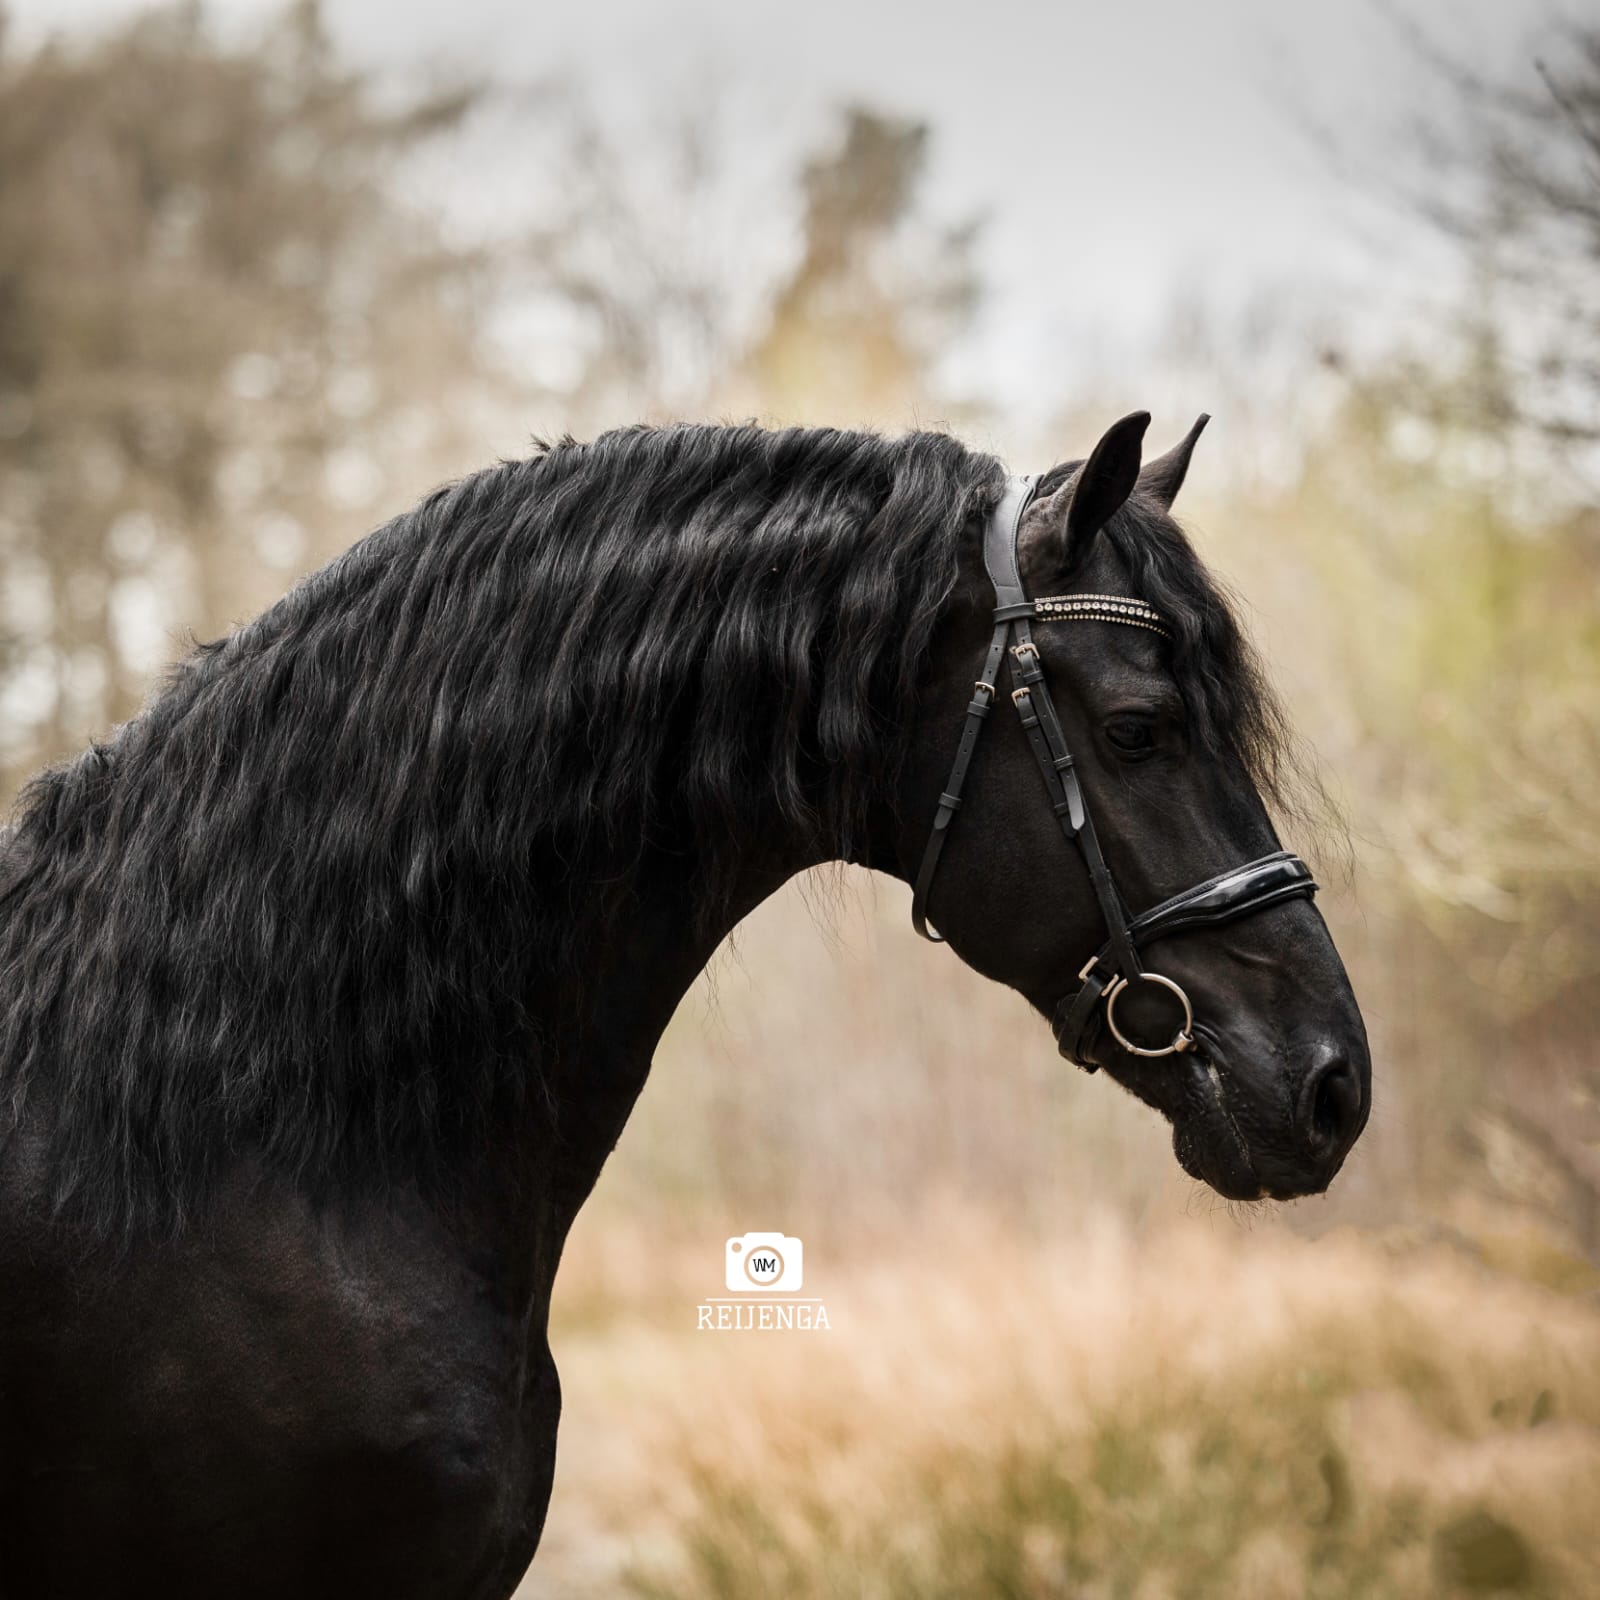 Friesian Horse for Sale